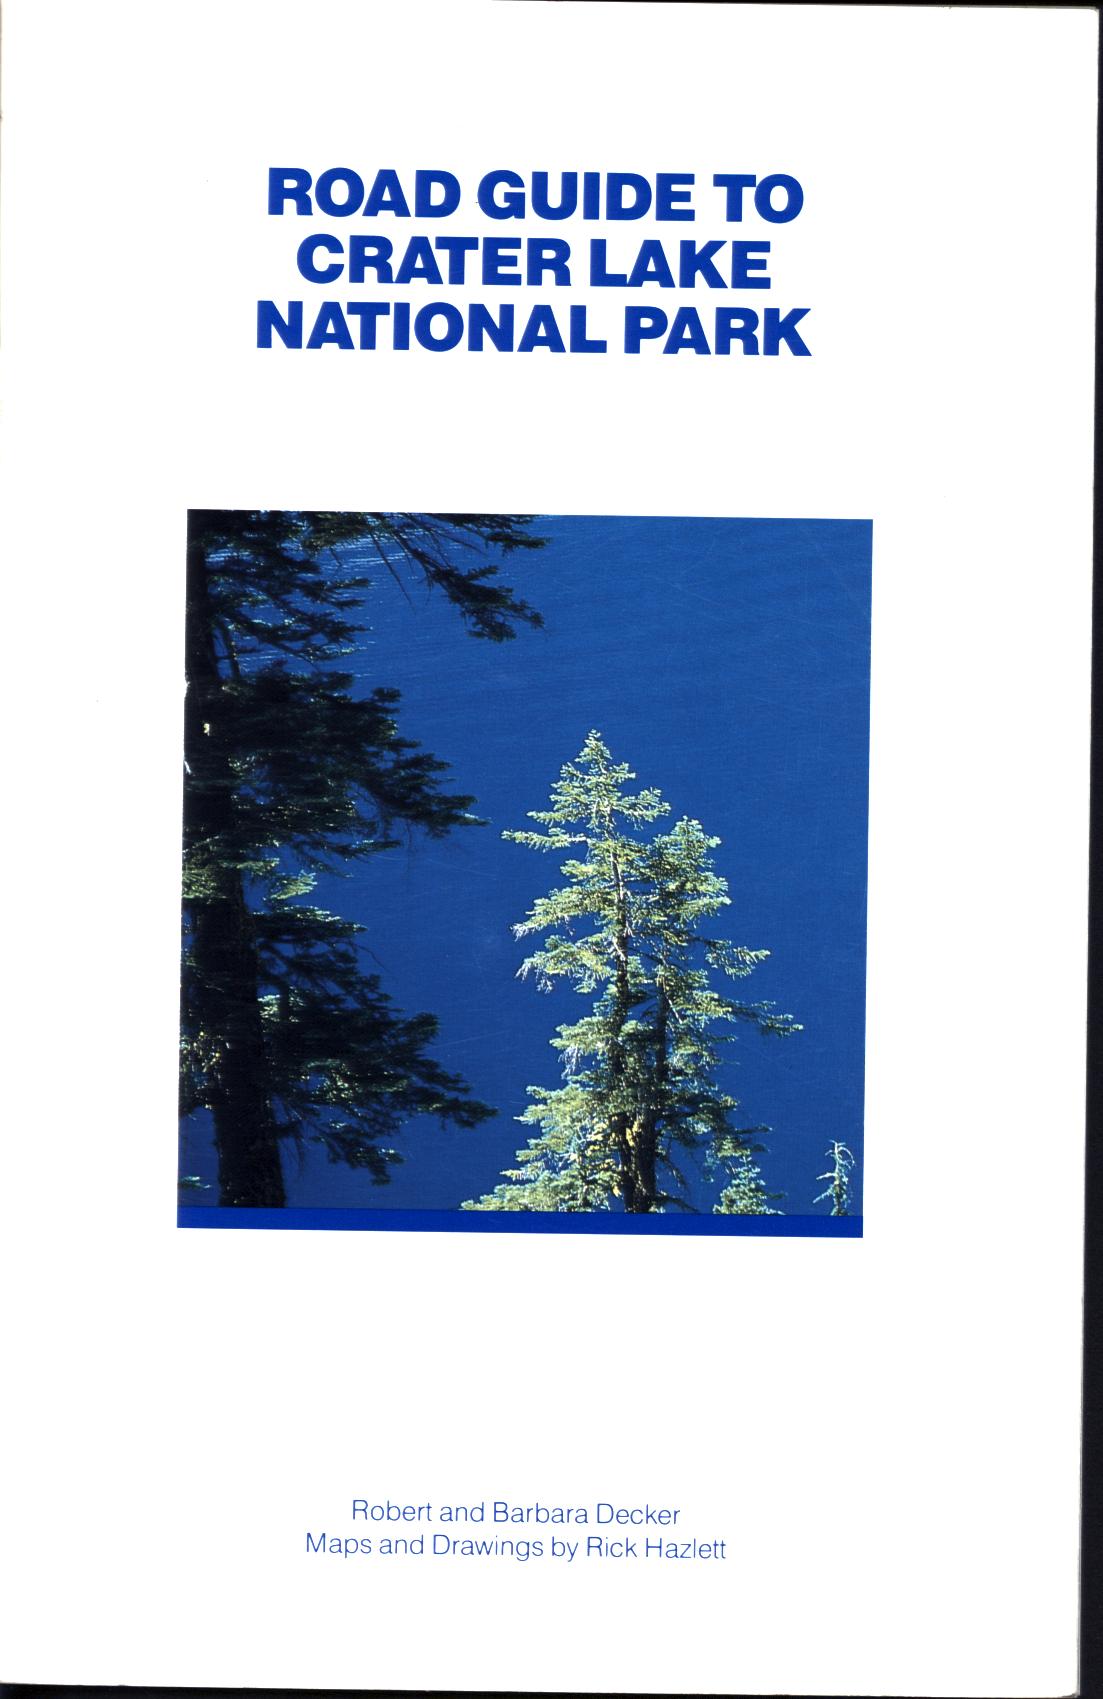 ROAD GUIDE TO CRATER LAKE NATIONAL PARK. 